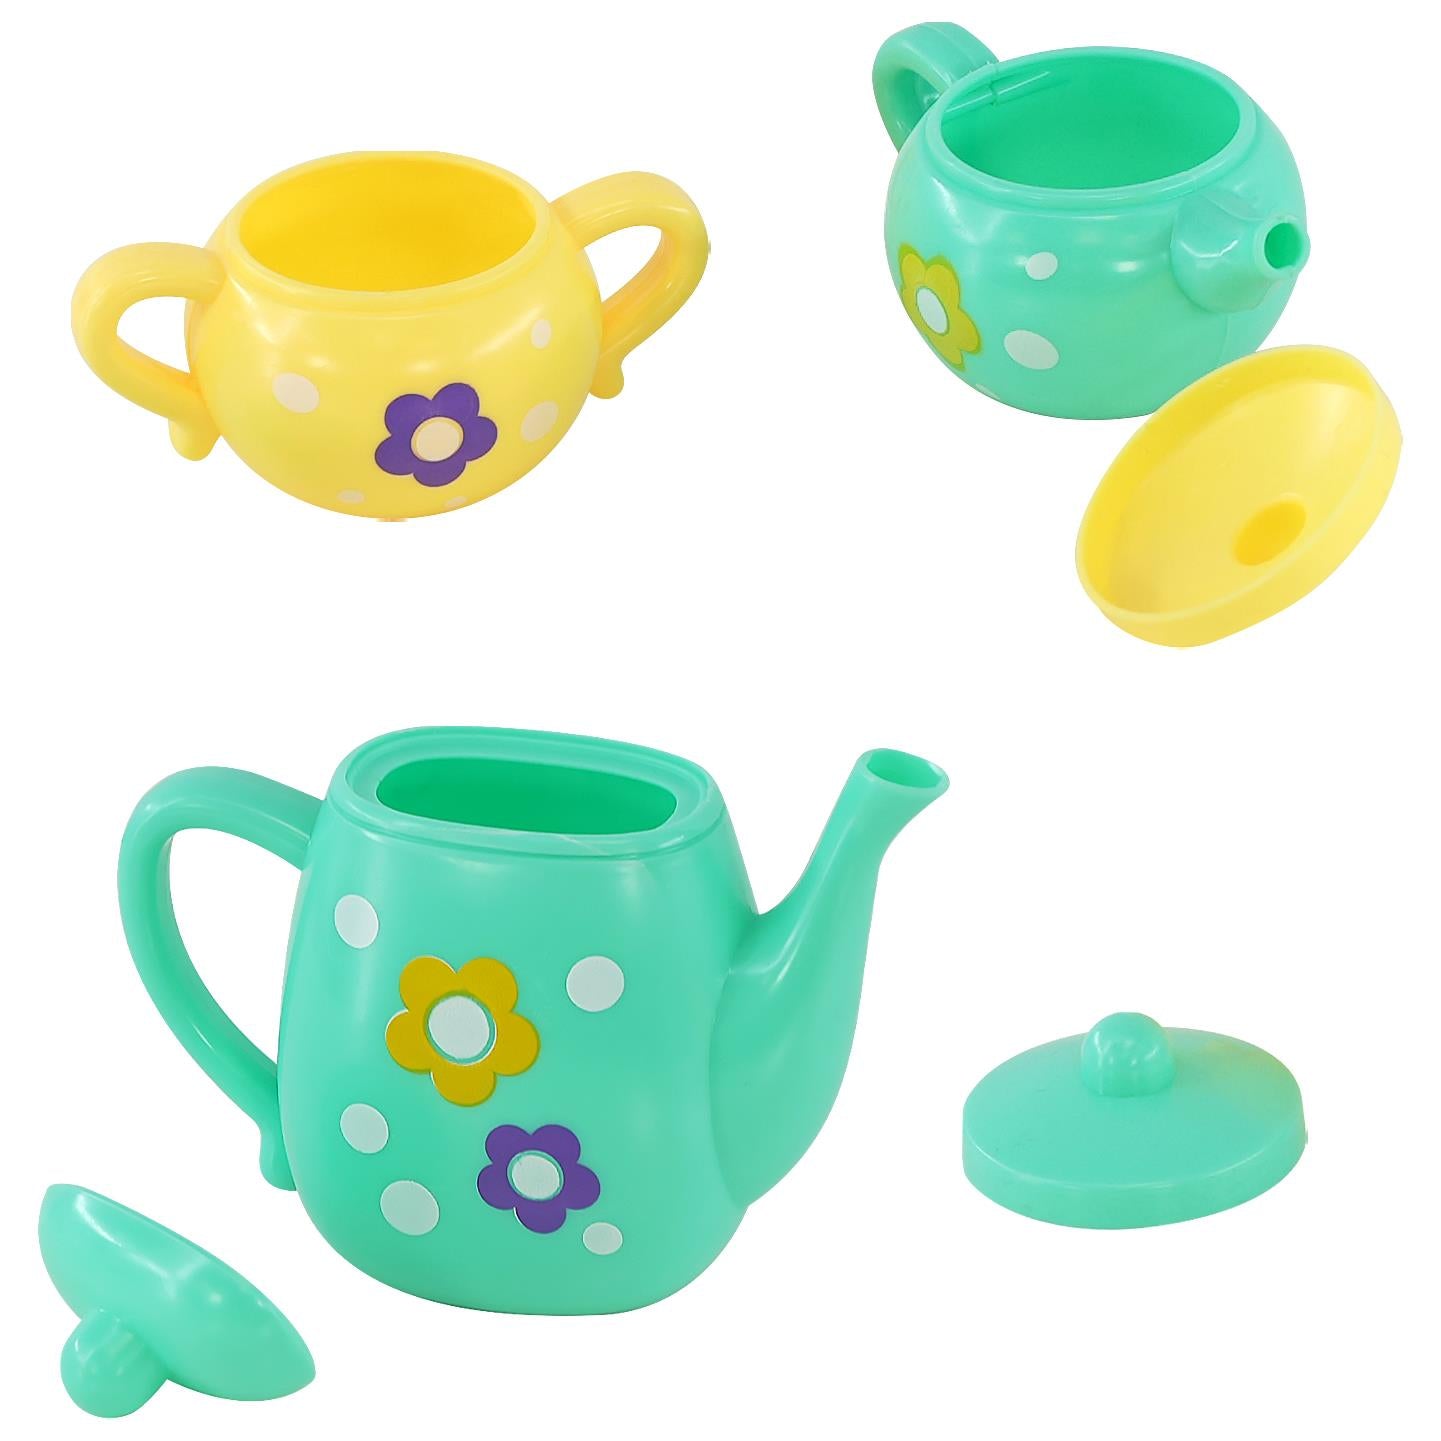 Children's Pretend Tea Playset by The Magic Toy Shop - UKBuyZone